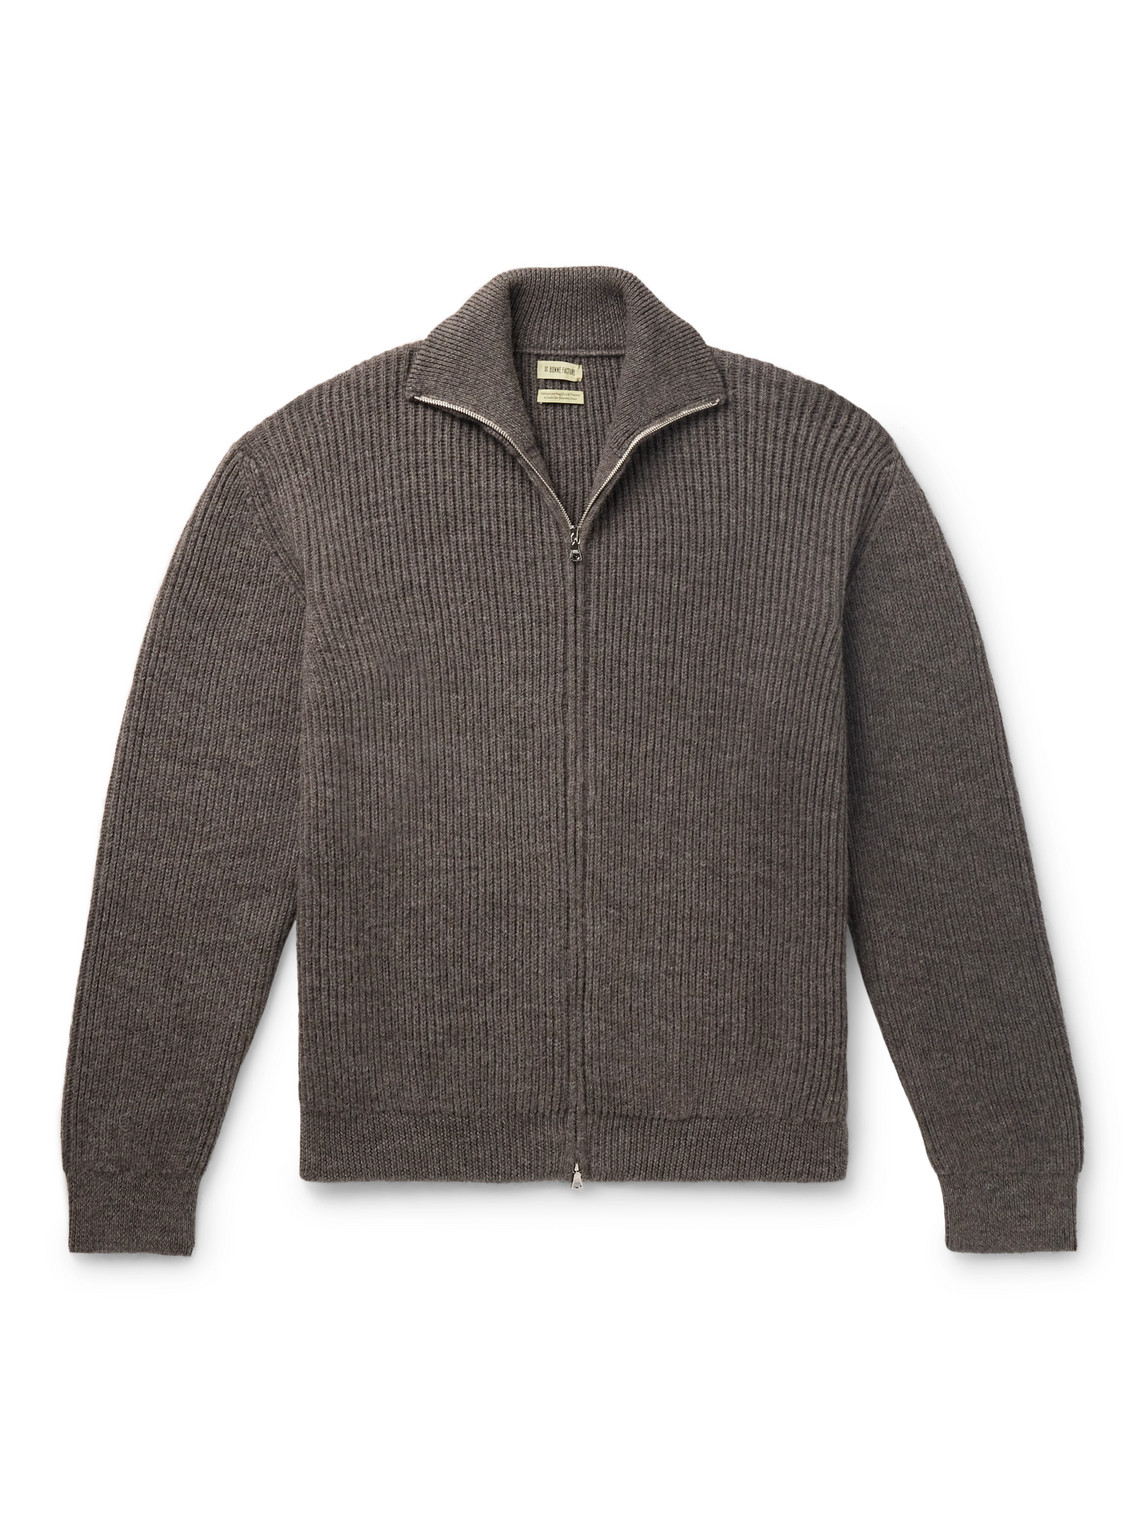 De Bonne Facture Ribbed Wool And Alpaca-blend Zip-up Sweater In Brown